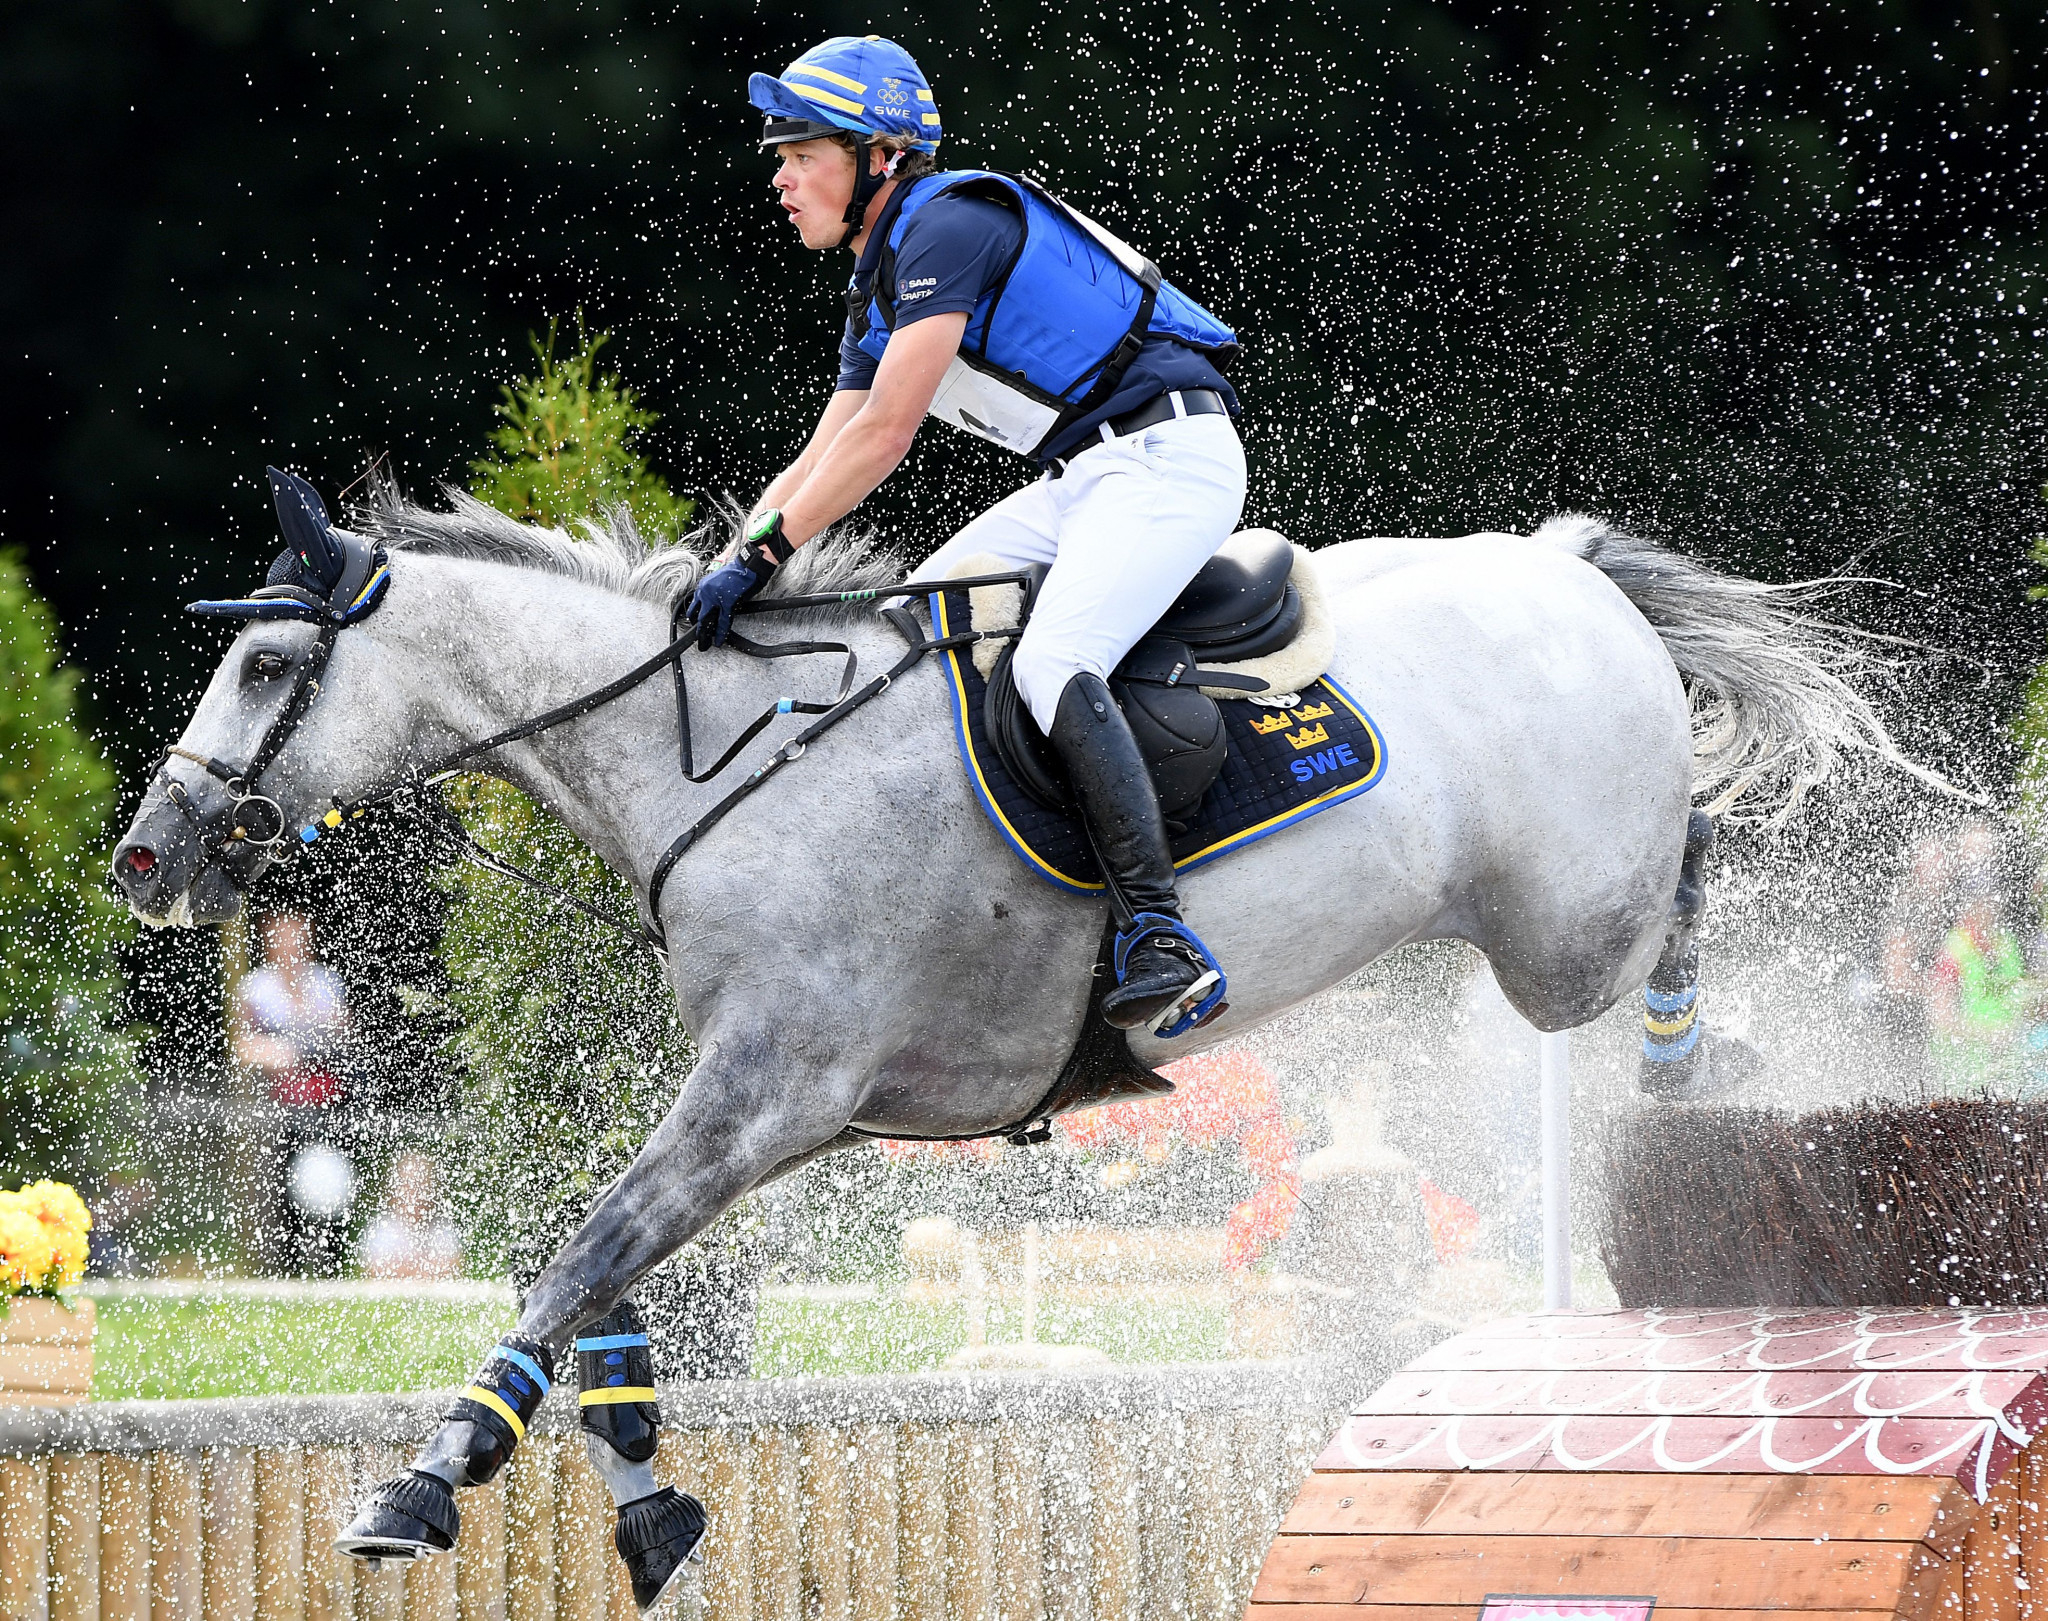 Sweden lead way after first part of dressage at FEI Eventing Nations Cup